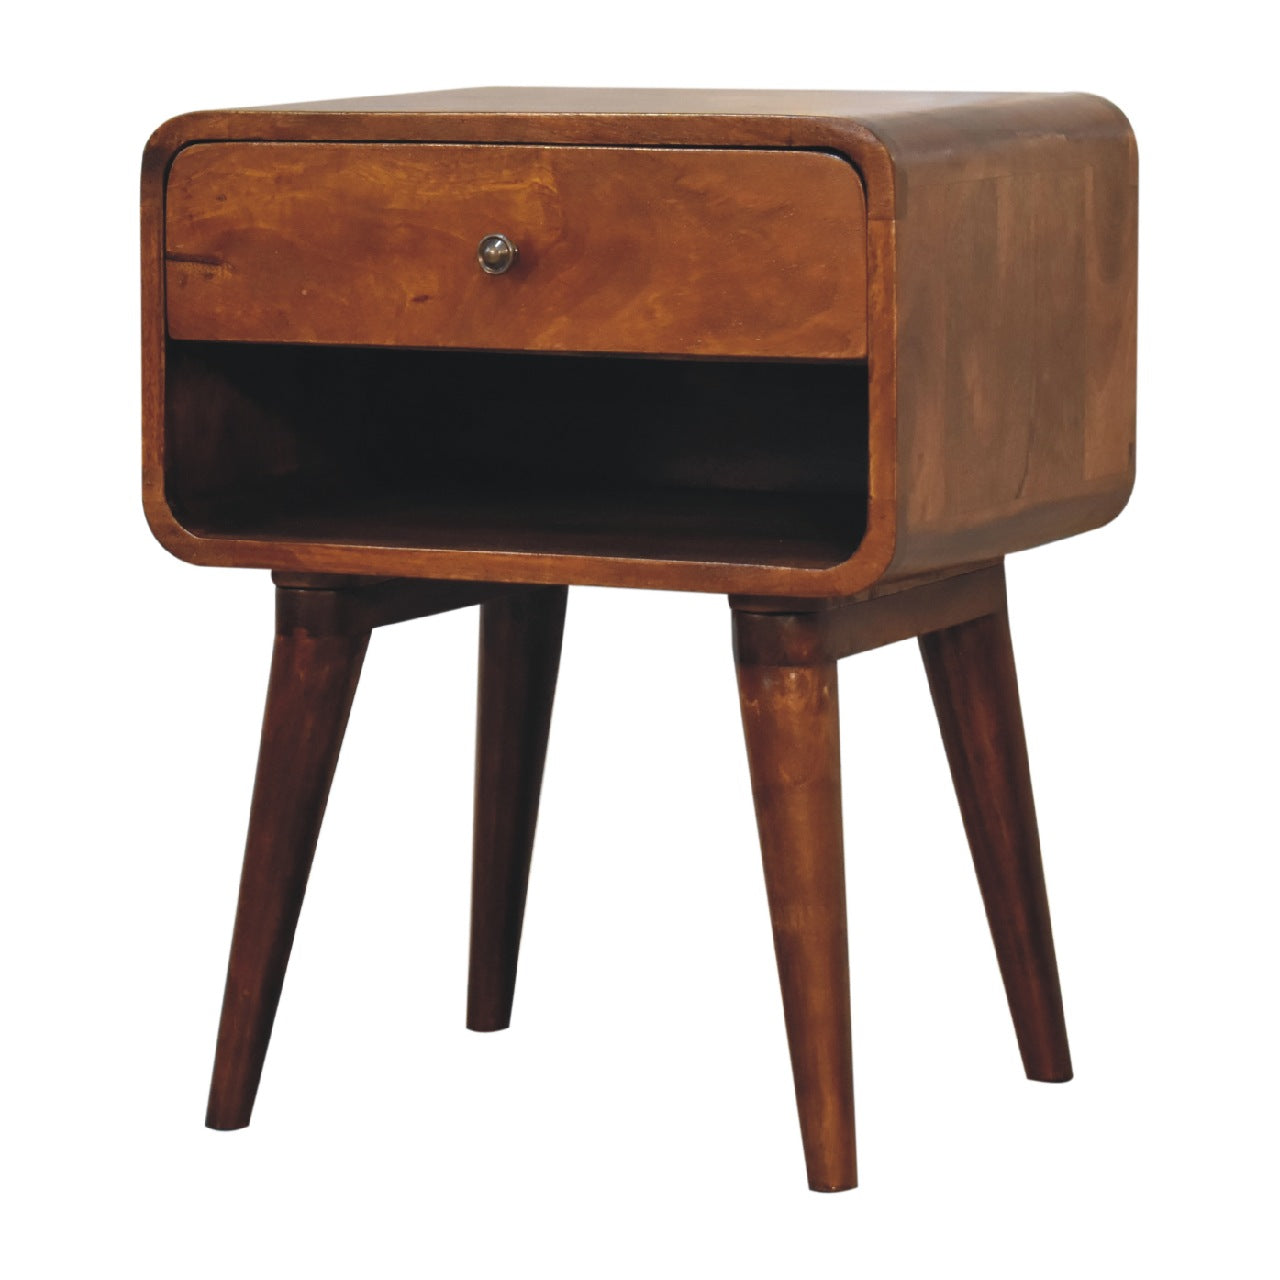 Curved Chestnut Bedside with Open Slot